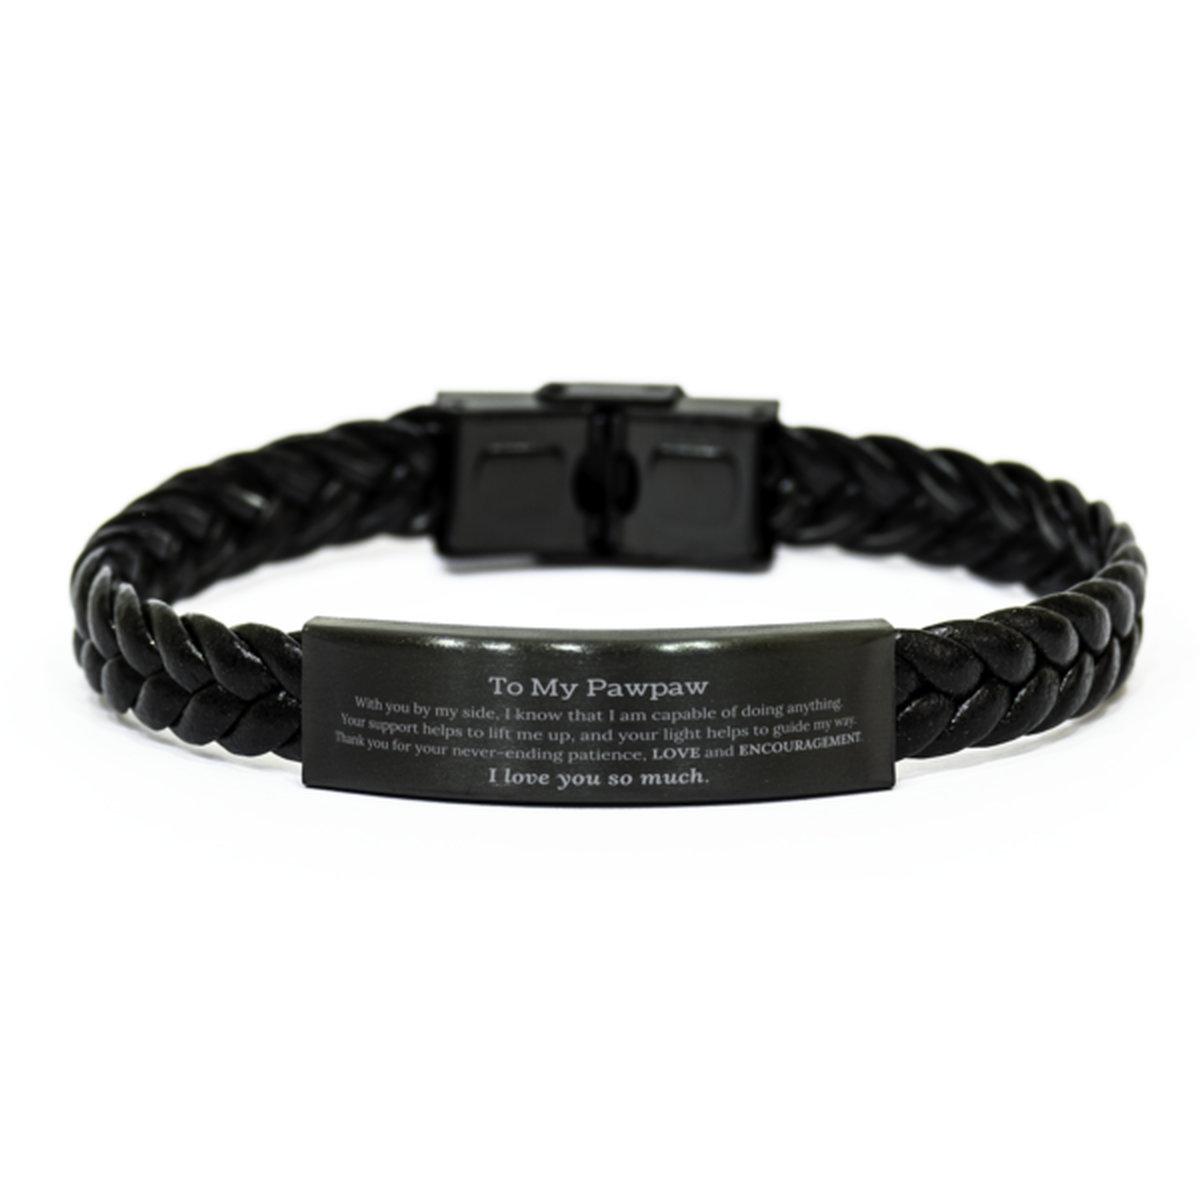 Appreciation Pawpaw Braided Leather Bracelet Gifts, To My Pawpaw Birthday Christmas Wedding Keepsake Gifts for Pawpaw With you by my side, I know that I am capable of doing anything. I love you so much